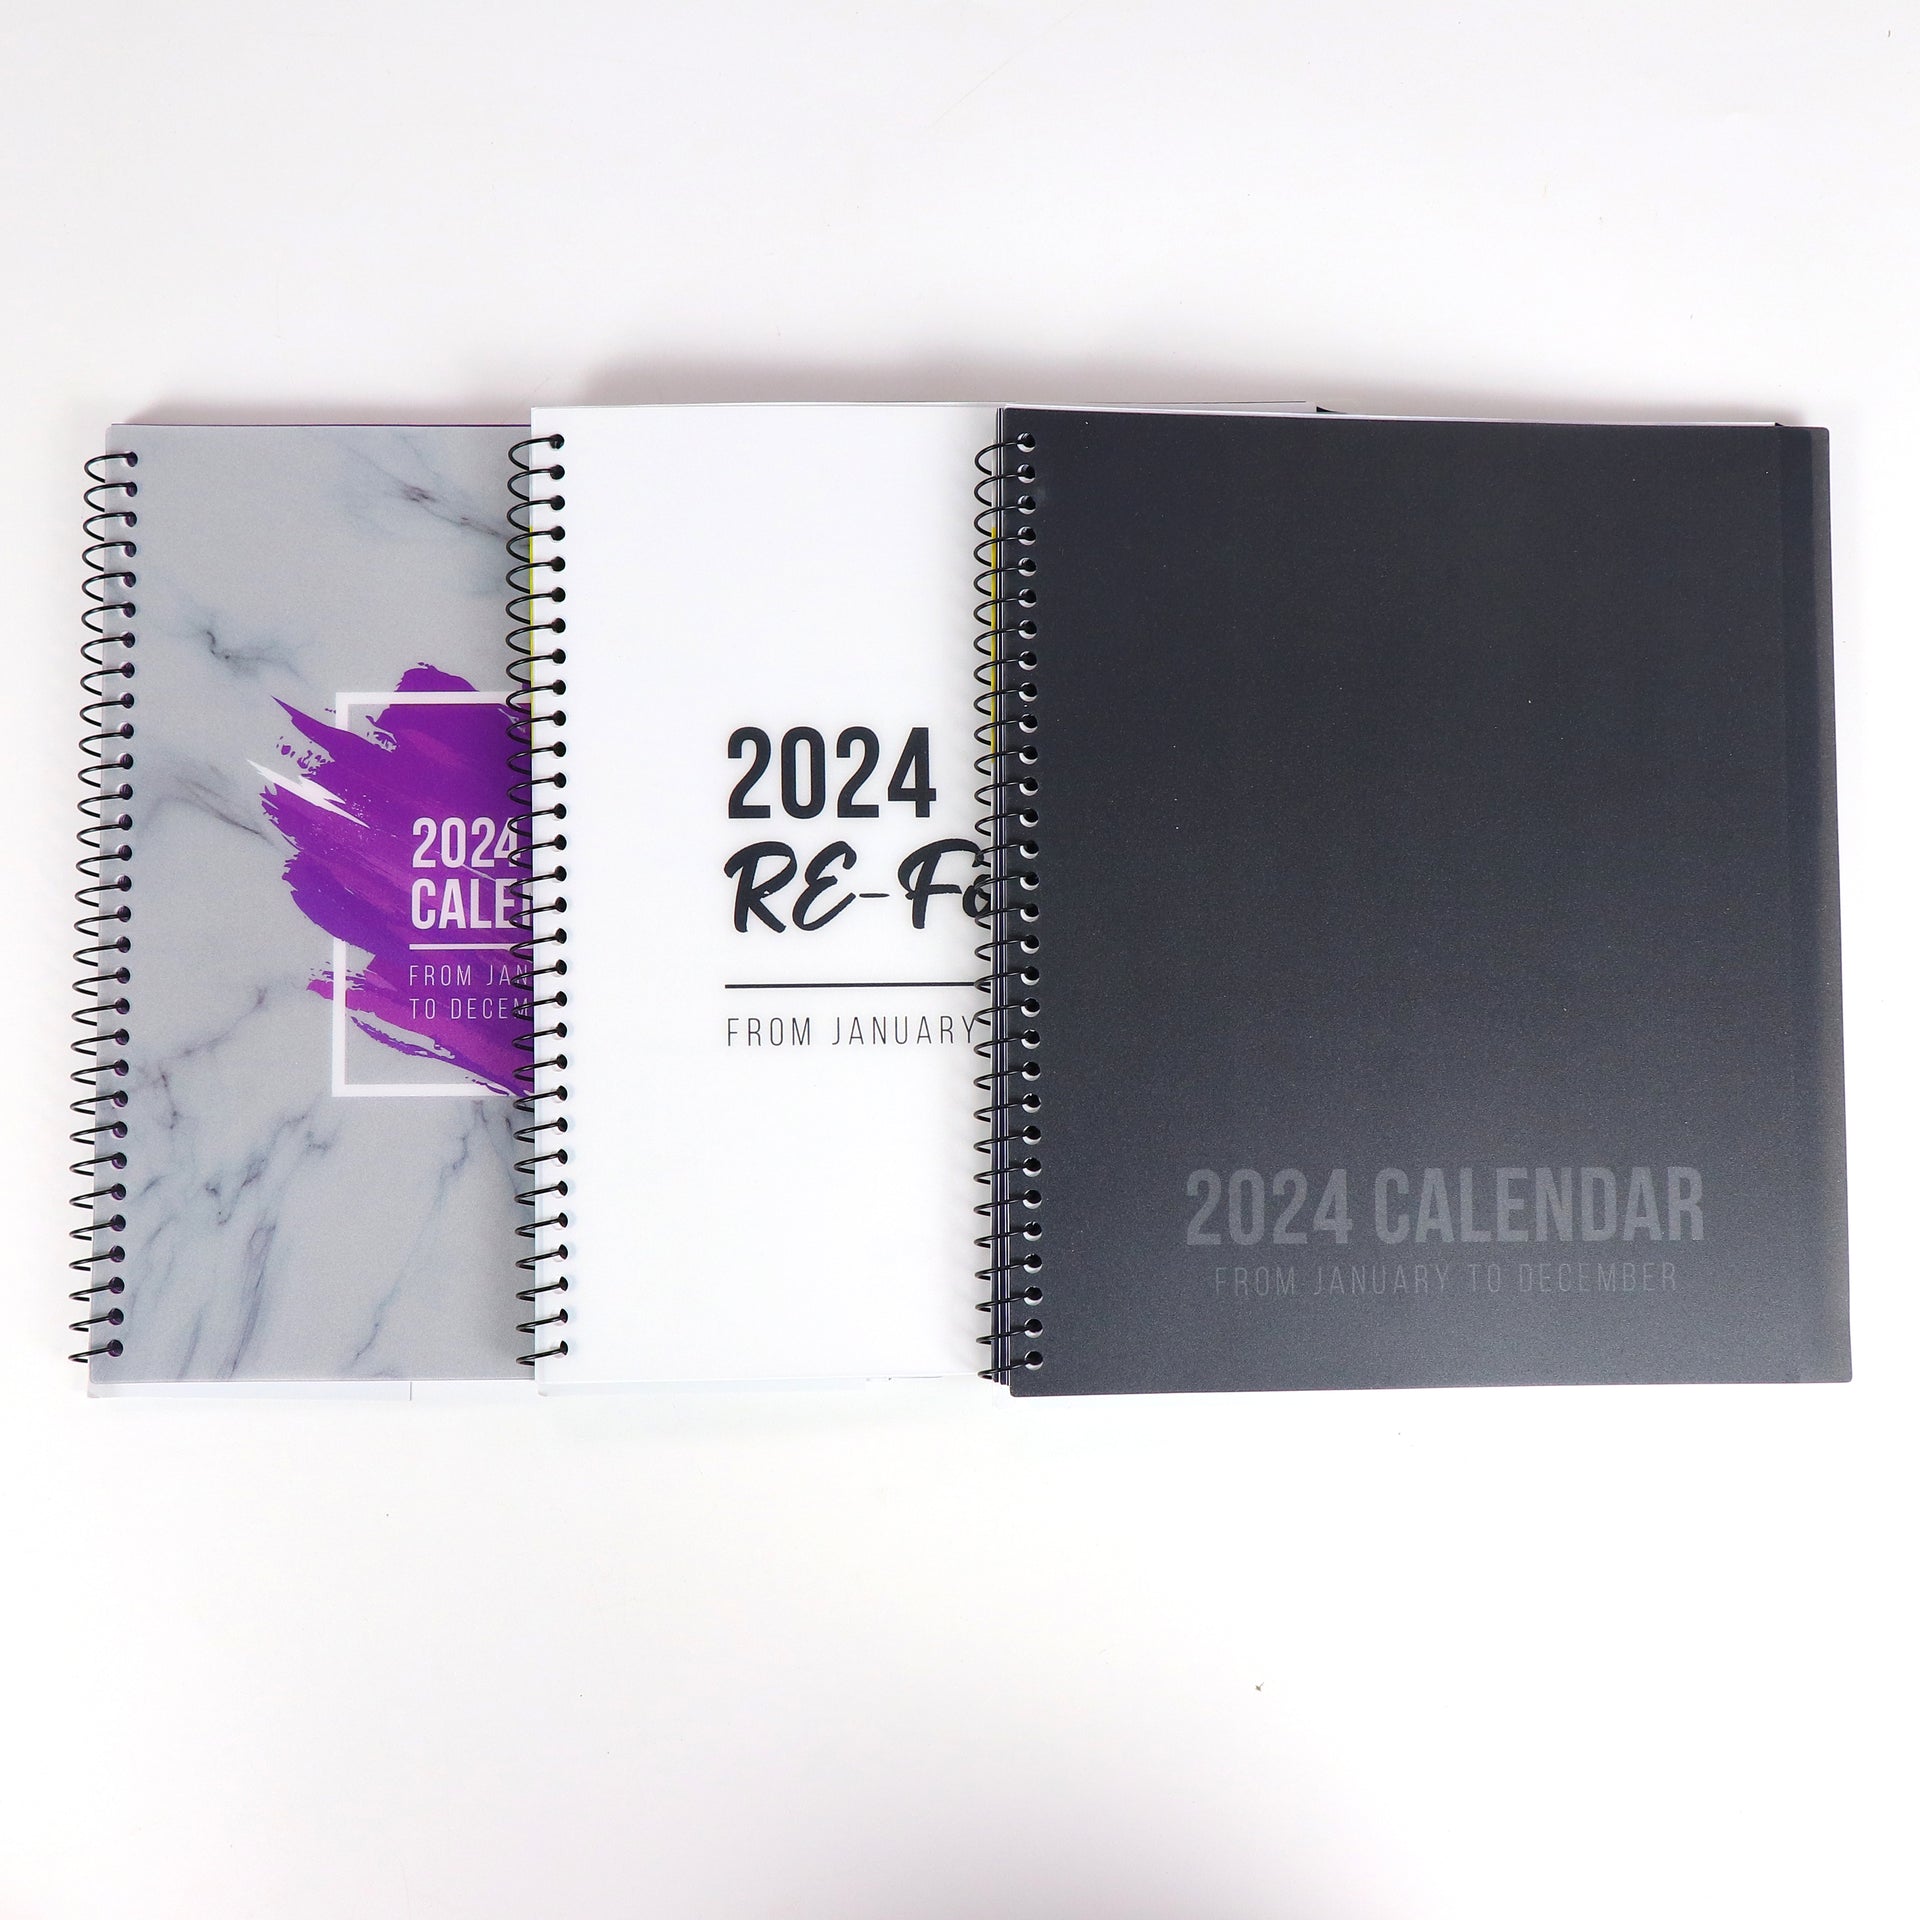 RE-FOCUS THE CREATIVE OFFICE, 2024 Calendar, Monthly and Weekly Views with To-Do List